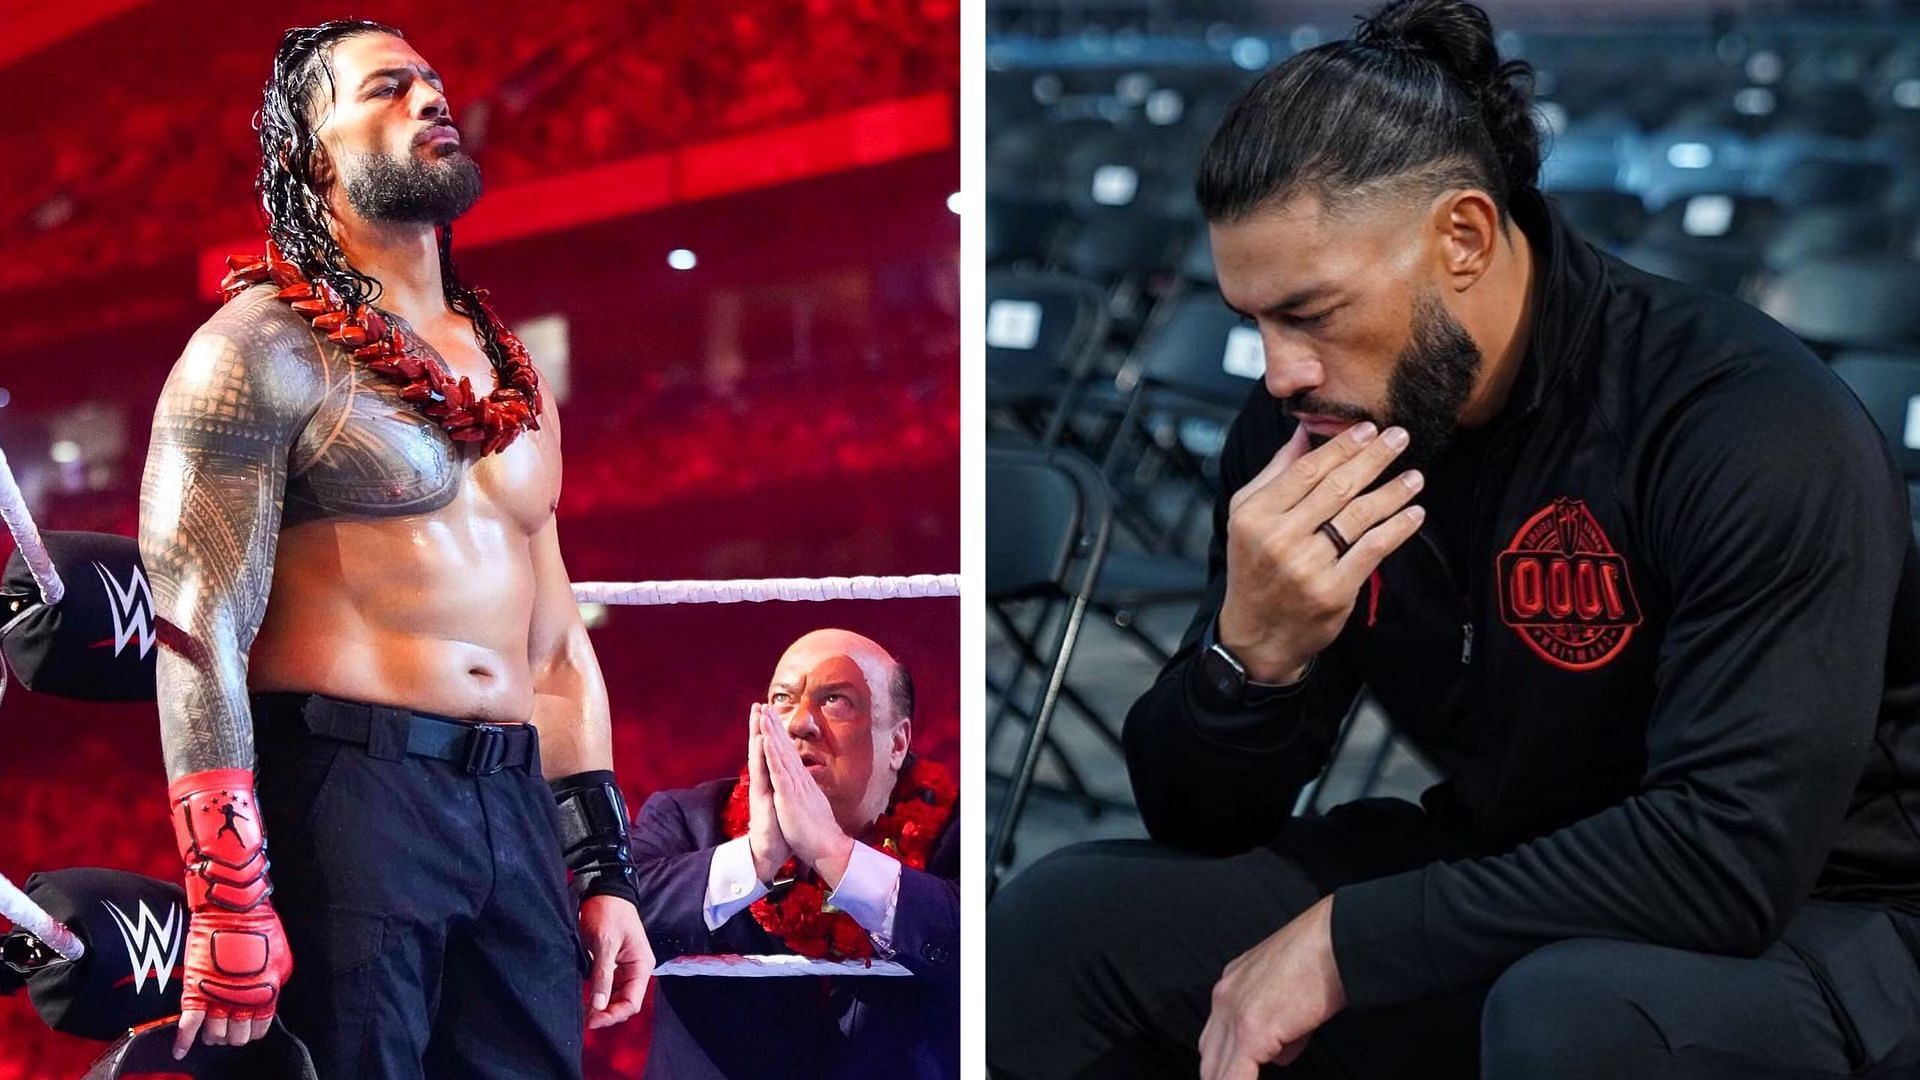 Roman Reigns has dabbled in acting when away from WWE